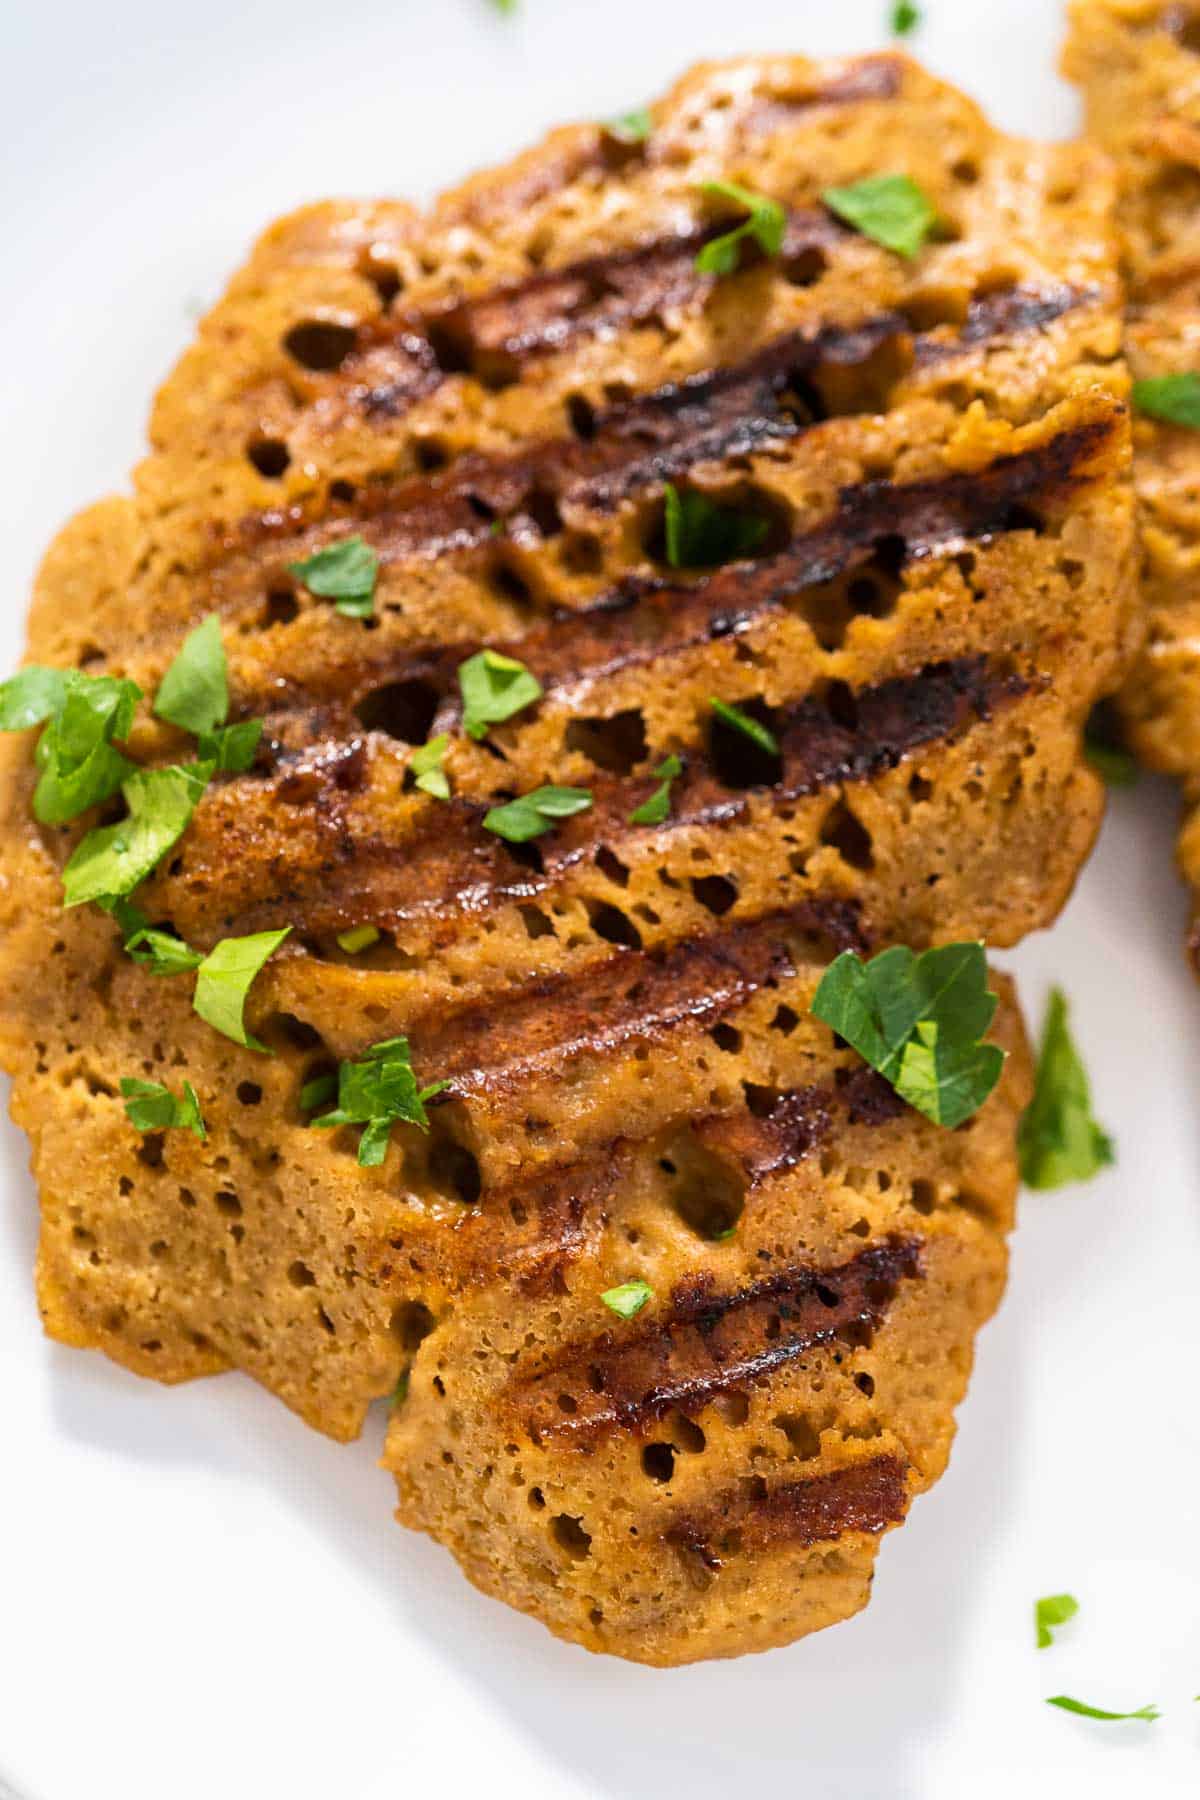 A single seitan chicken cutlet, with grill marks and sprinkled with fresh parsley.